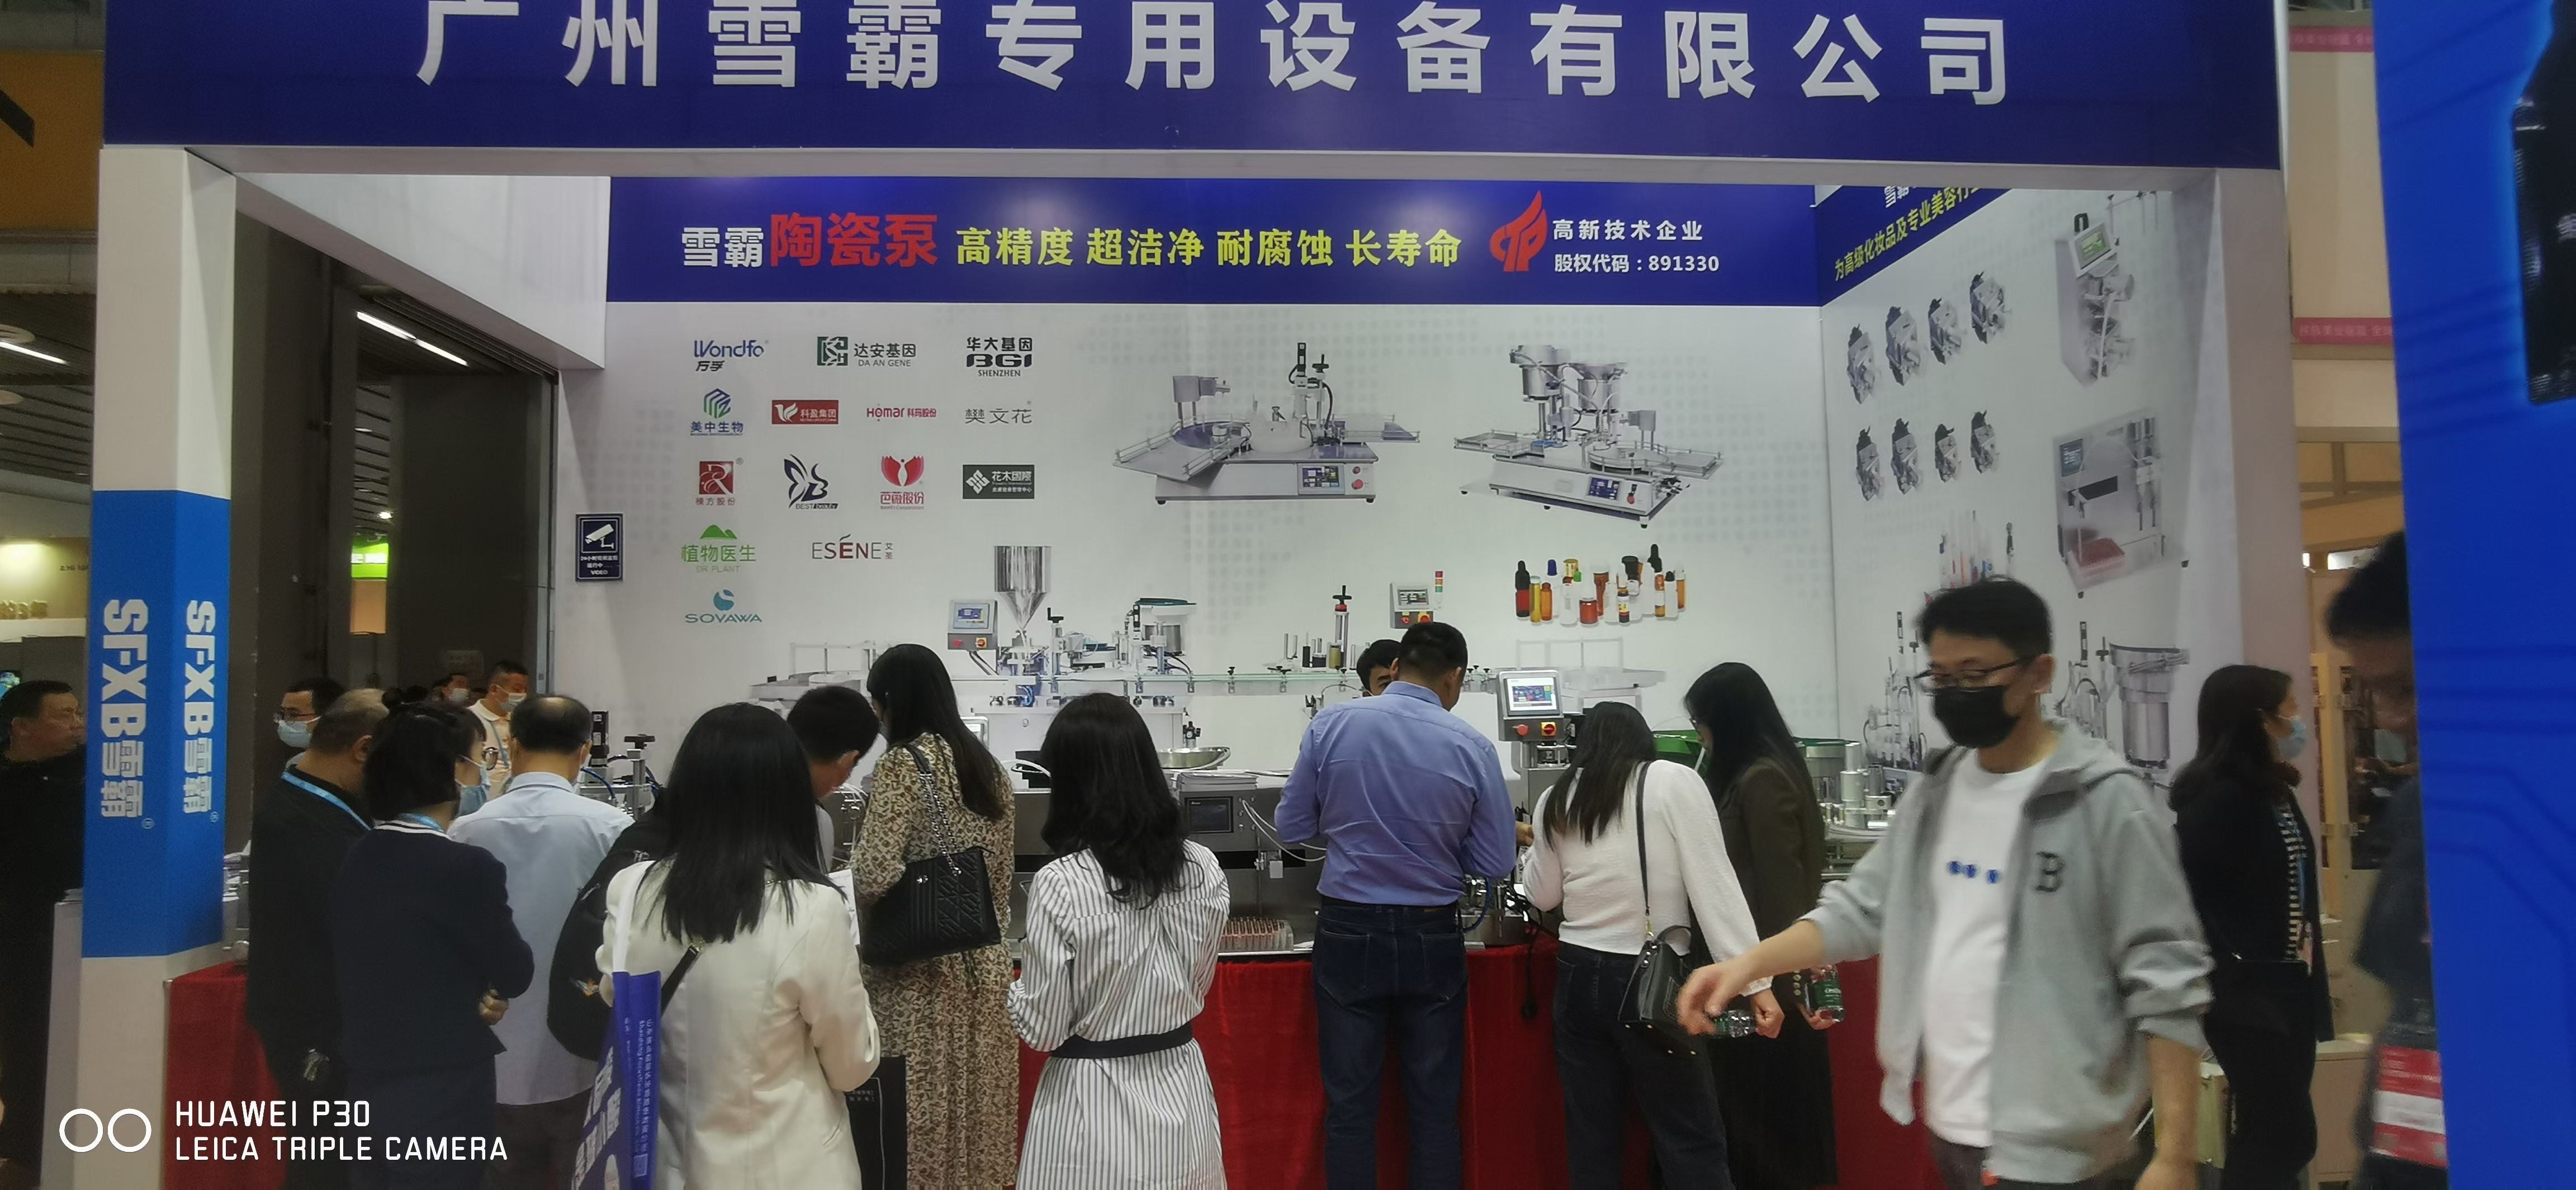 Exhibition Information | The 60th China (Guangzhou) International Beauty Expo